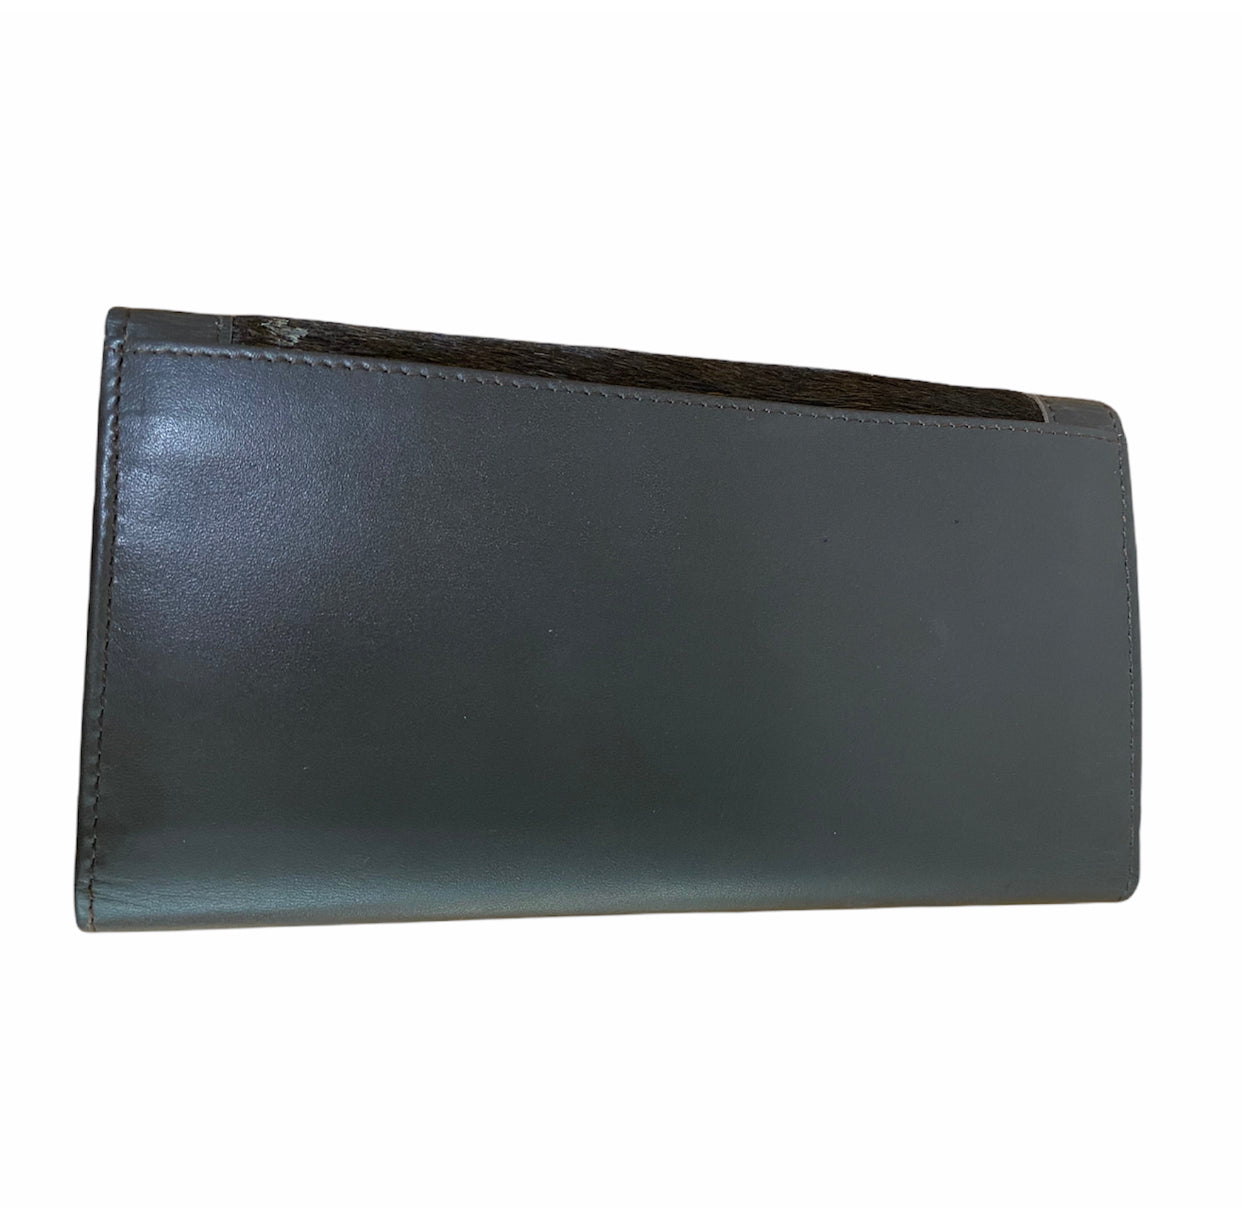 A7761 - Hair-On Collection Secretary Style Wallet